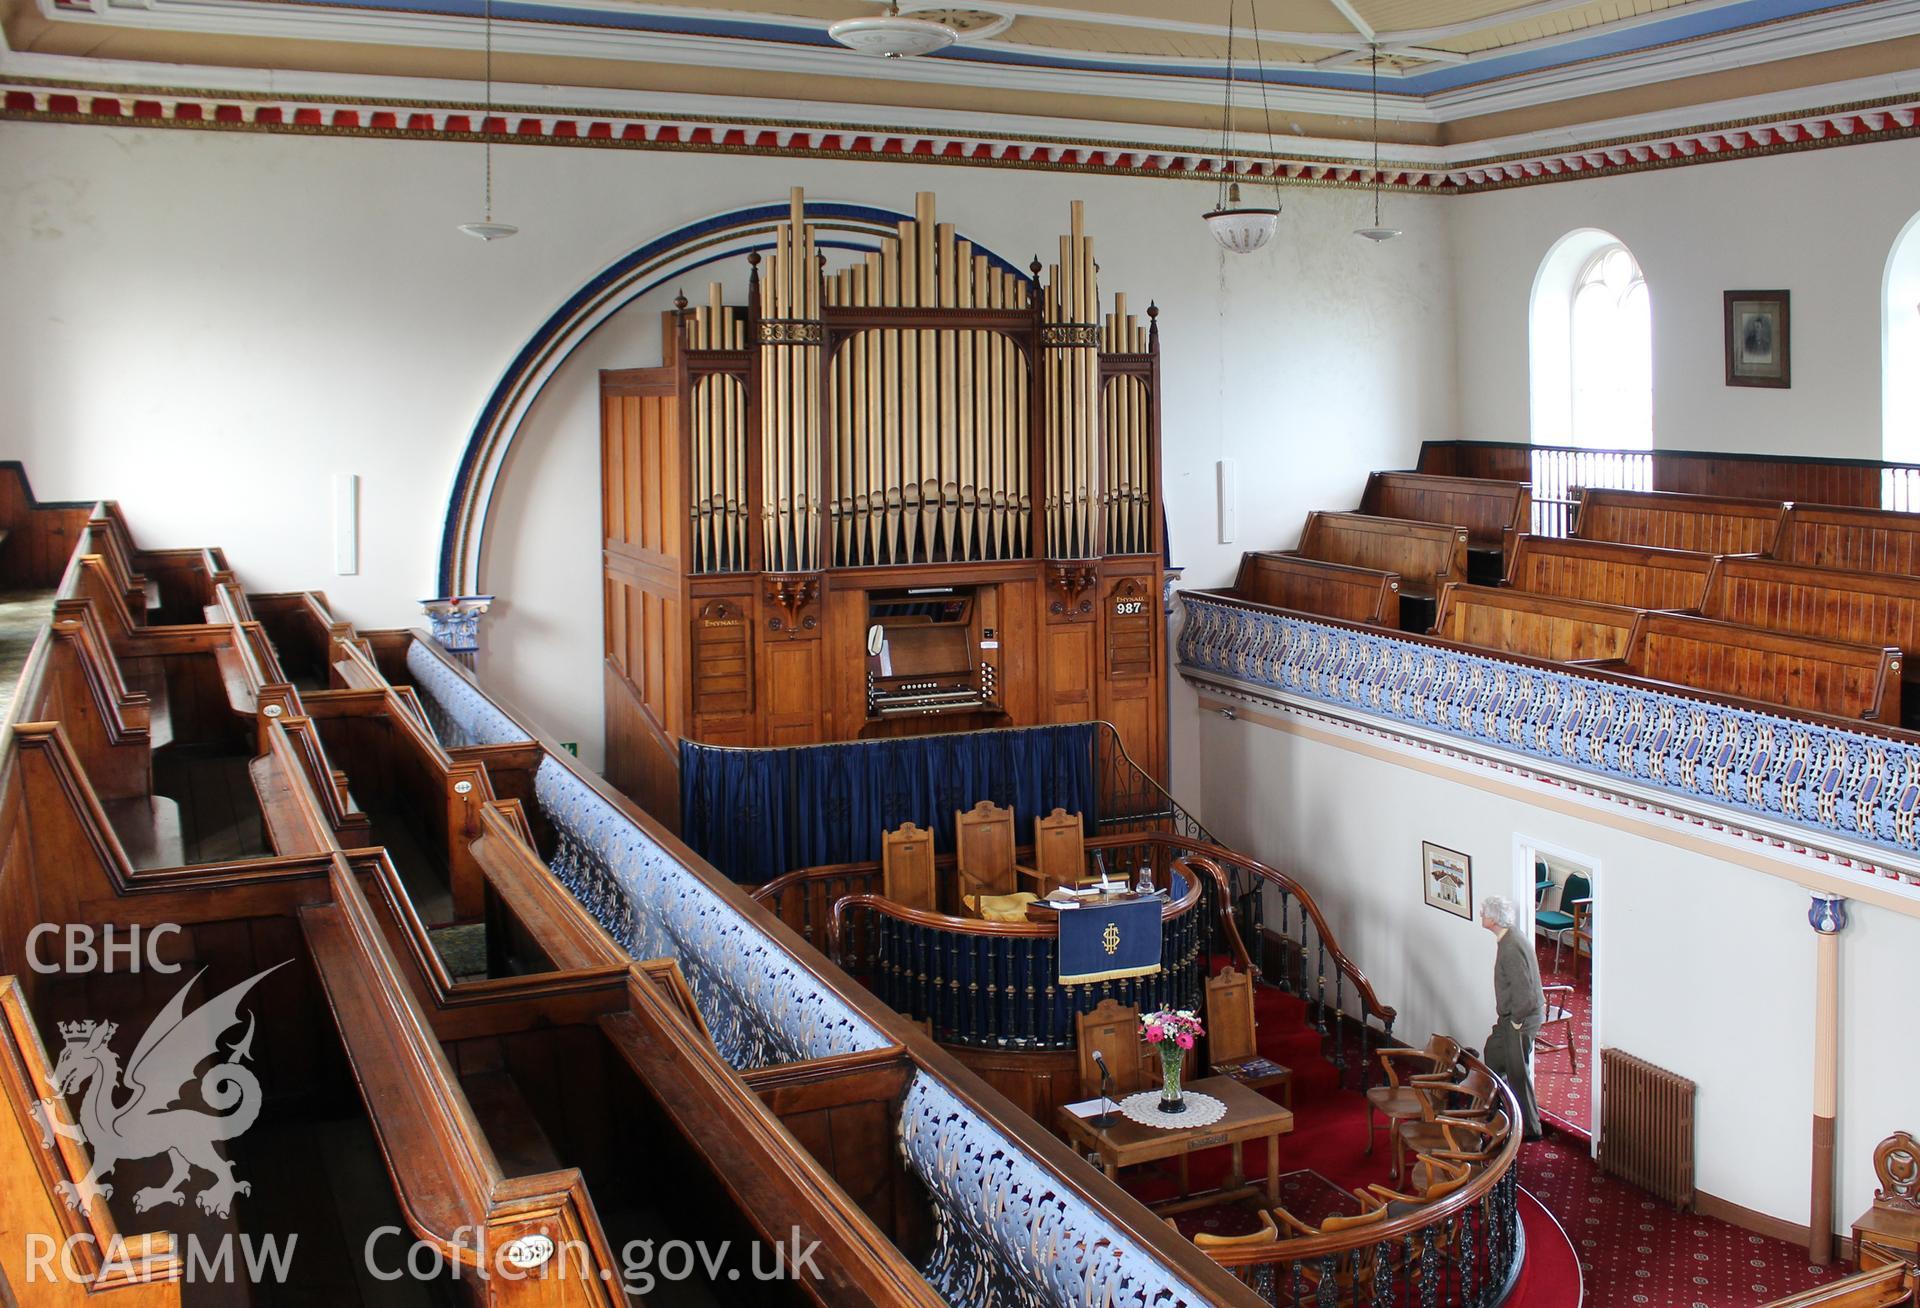 Interior view from first floor balcony showing the pulpit and organ. Photographic survey of Seion Welsh Baptist Chapel, Morriston, conducted by Sue Fielding on 13th May 2017.